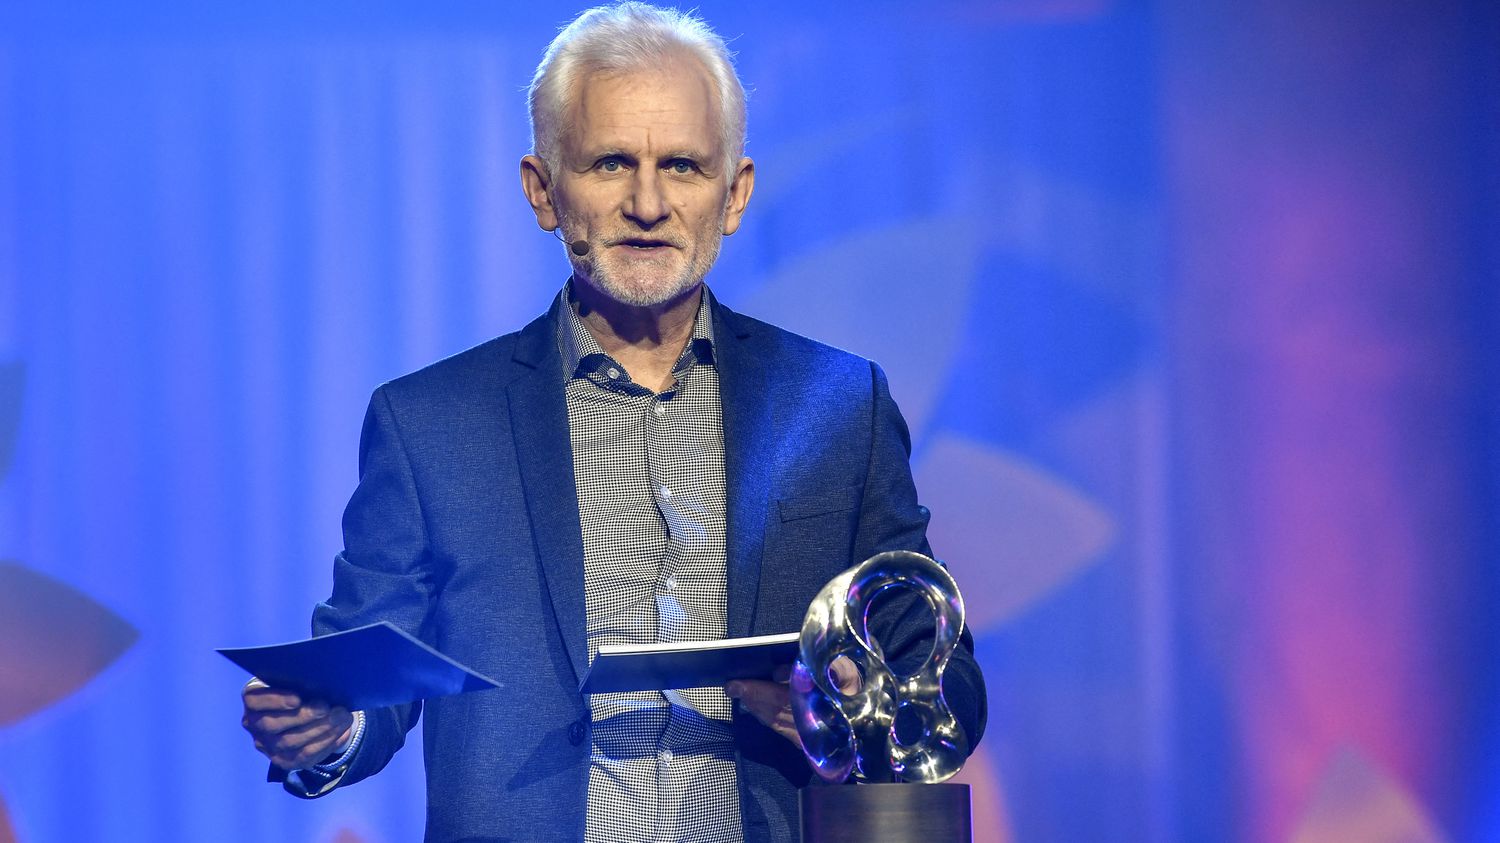 Nobel Peace Prize awarded to Belarusian lawyer Ales Bialiatski, Russian NGO Memorial and Center for Civil Liberties in Ukraine
